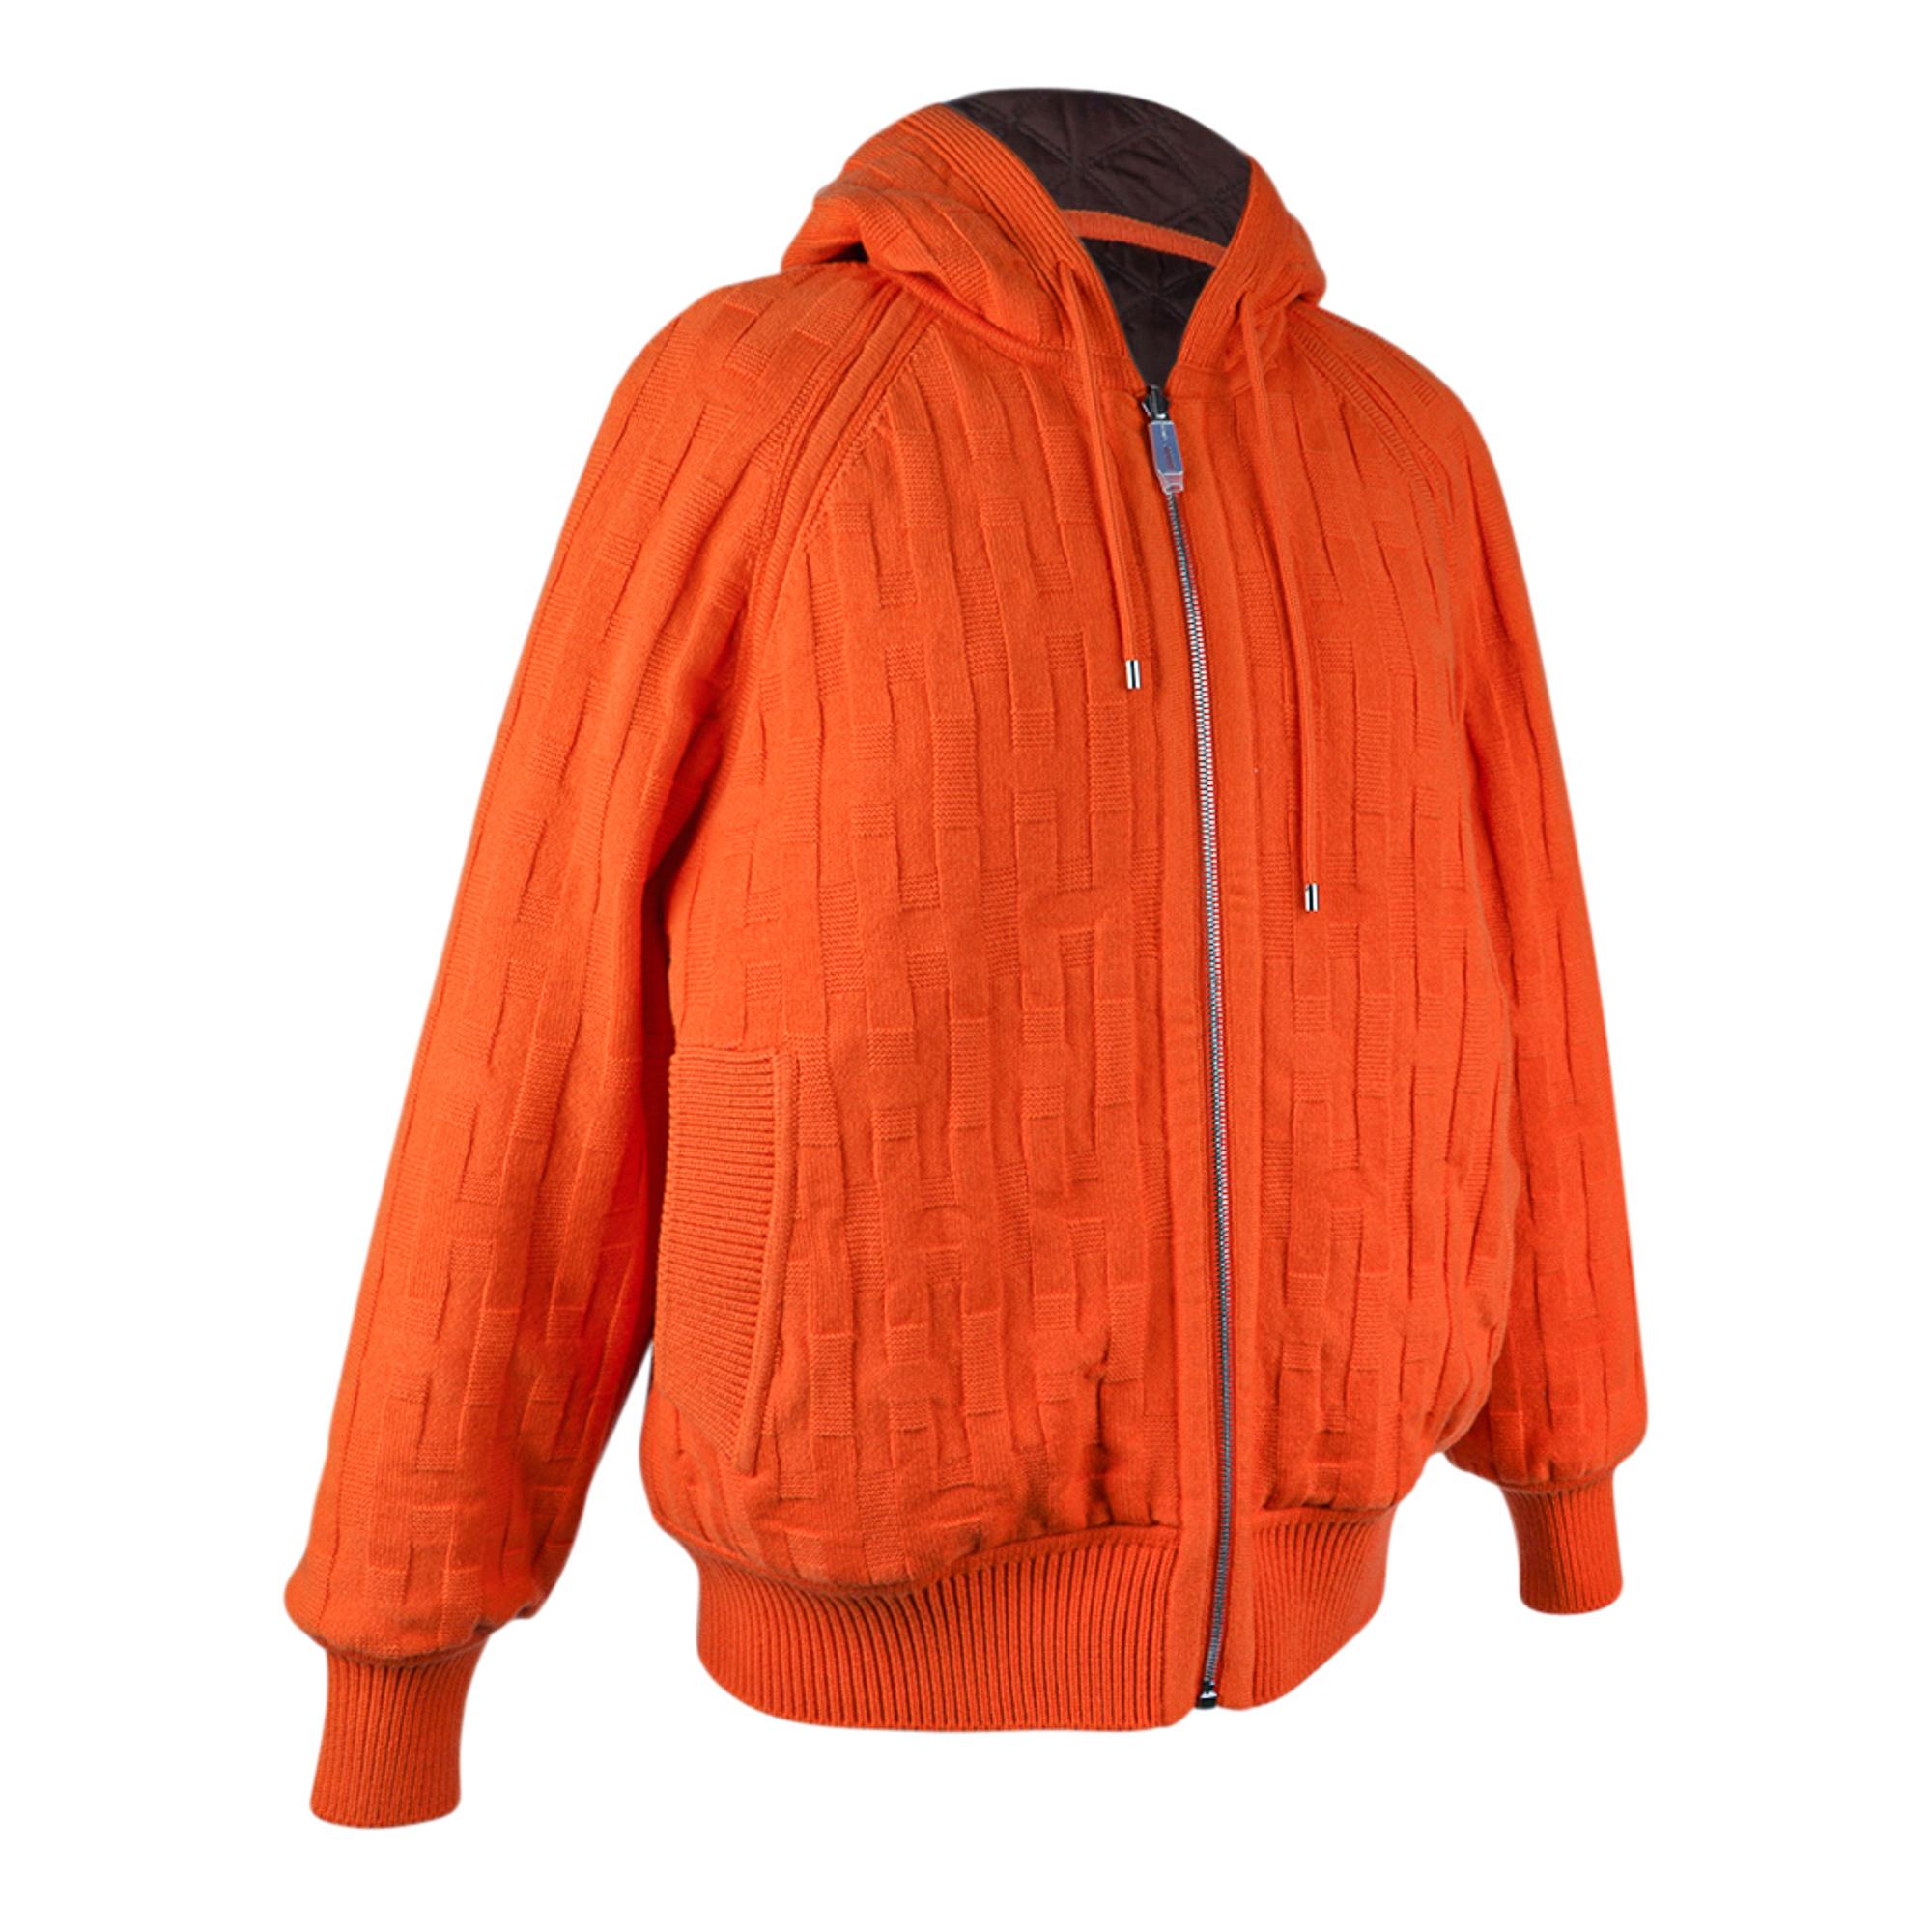 Mightychic offers an Hermès Reversible Zip Cardigan featured in Orange Saturne and Brown.
Warm with hood and quilted cotton, wool and plume canvas.
Virgin wool with Losanges and H motifs.
Reverses to wadded brown quilted side with Orange ribbed